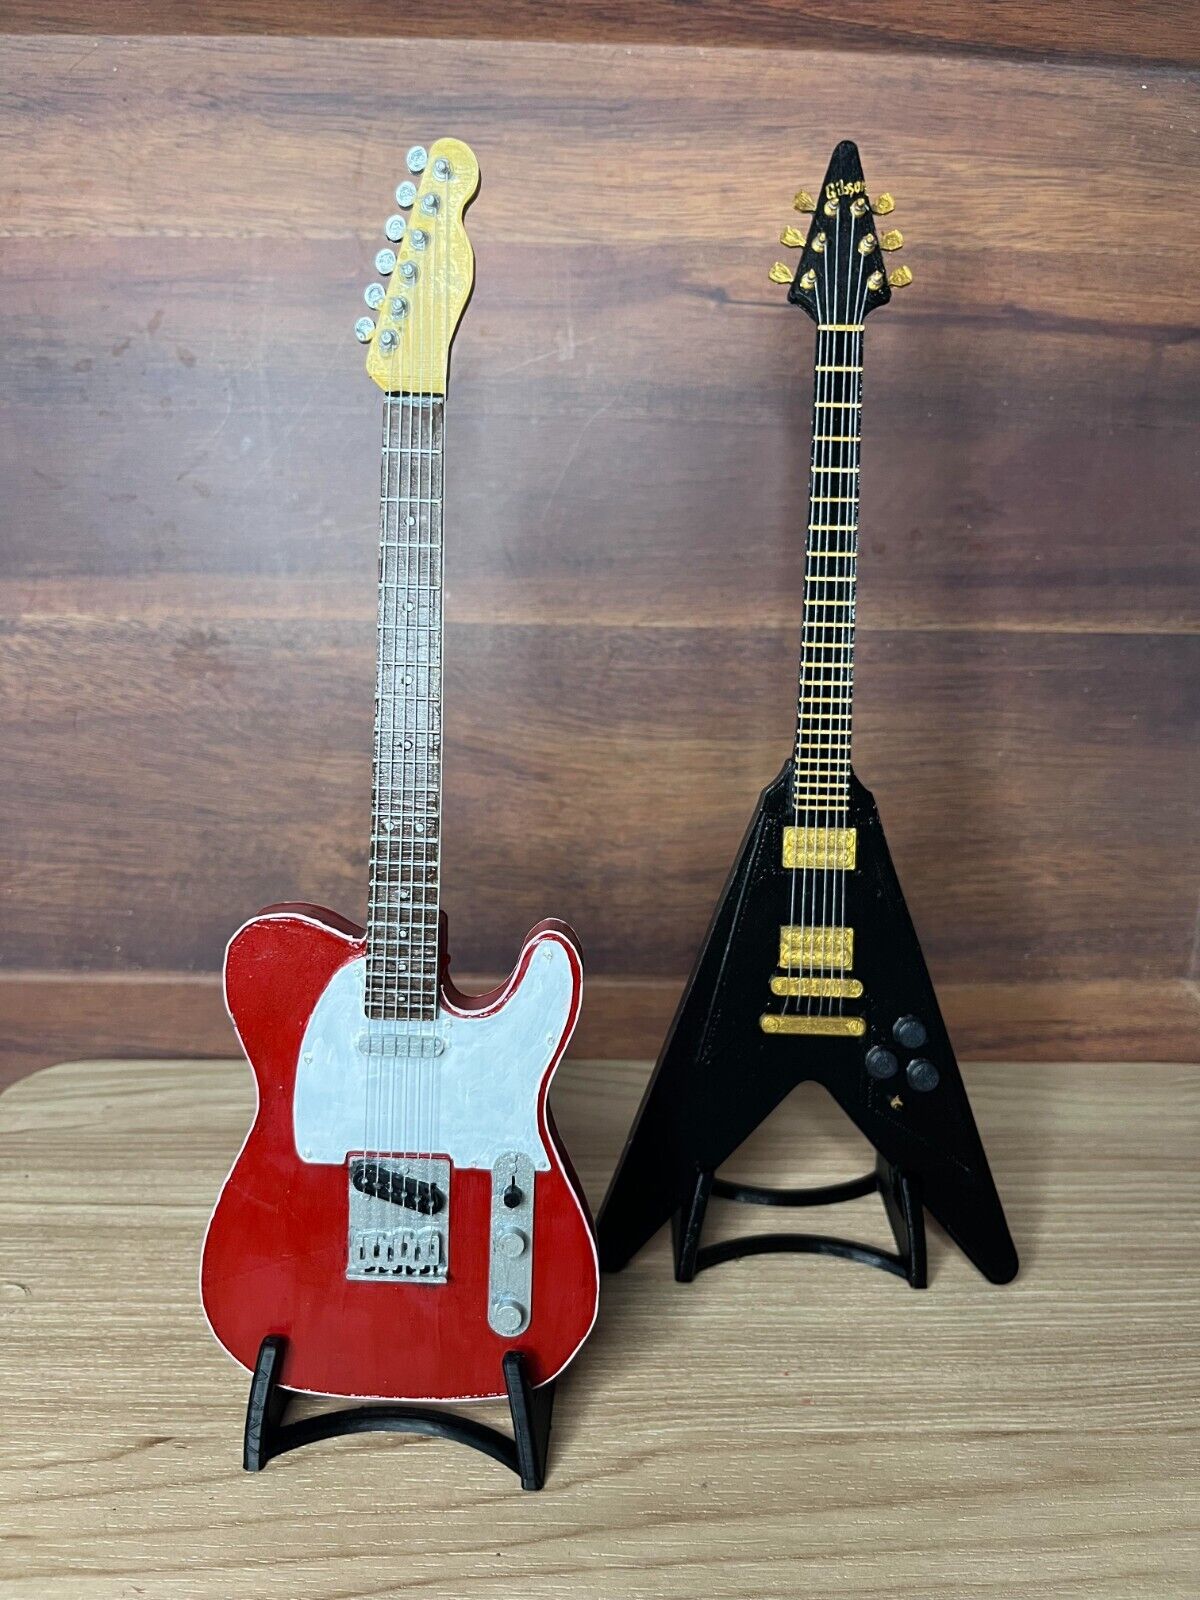 Miniature Guitar Replica Fender Telecaster and Gibson Flying V Model Display